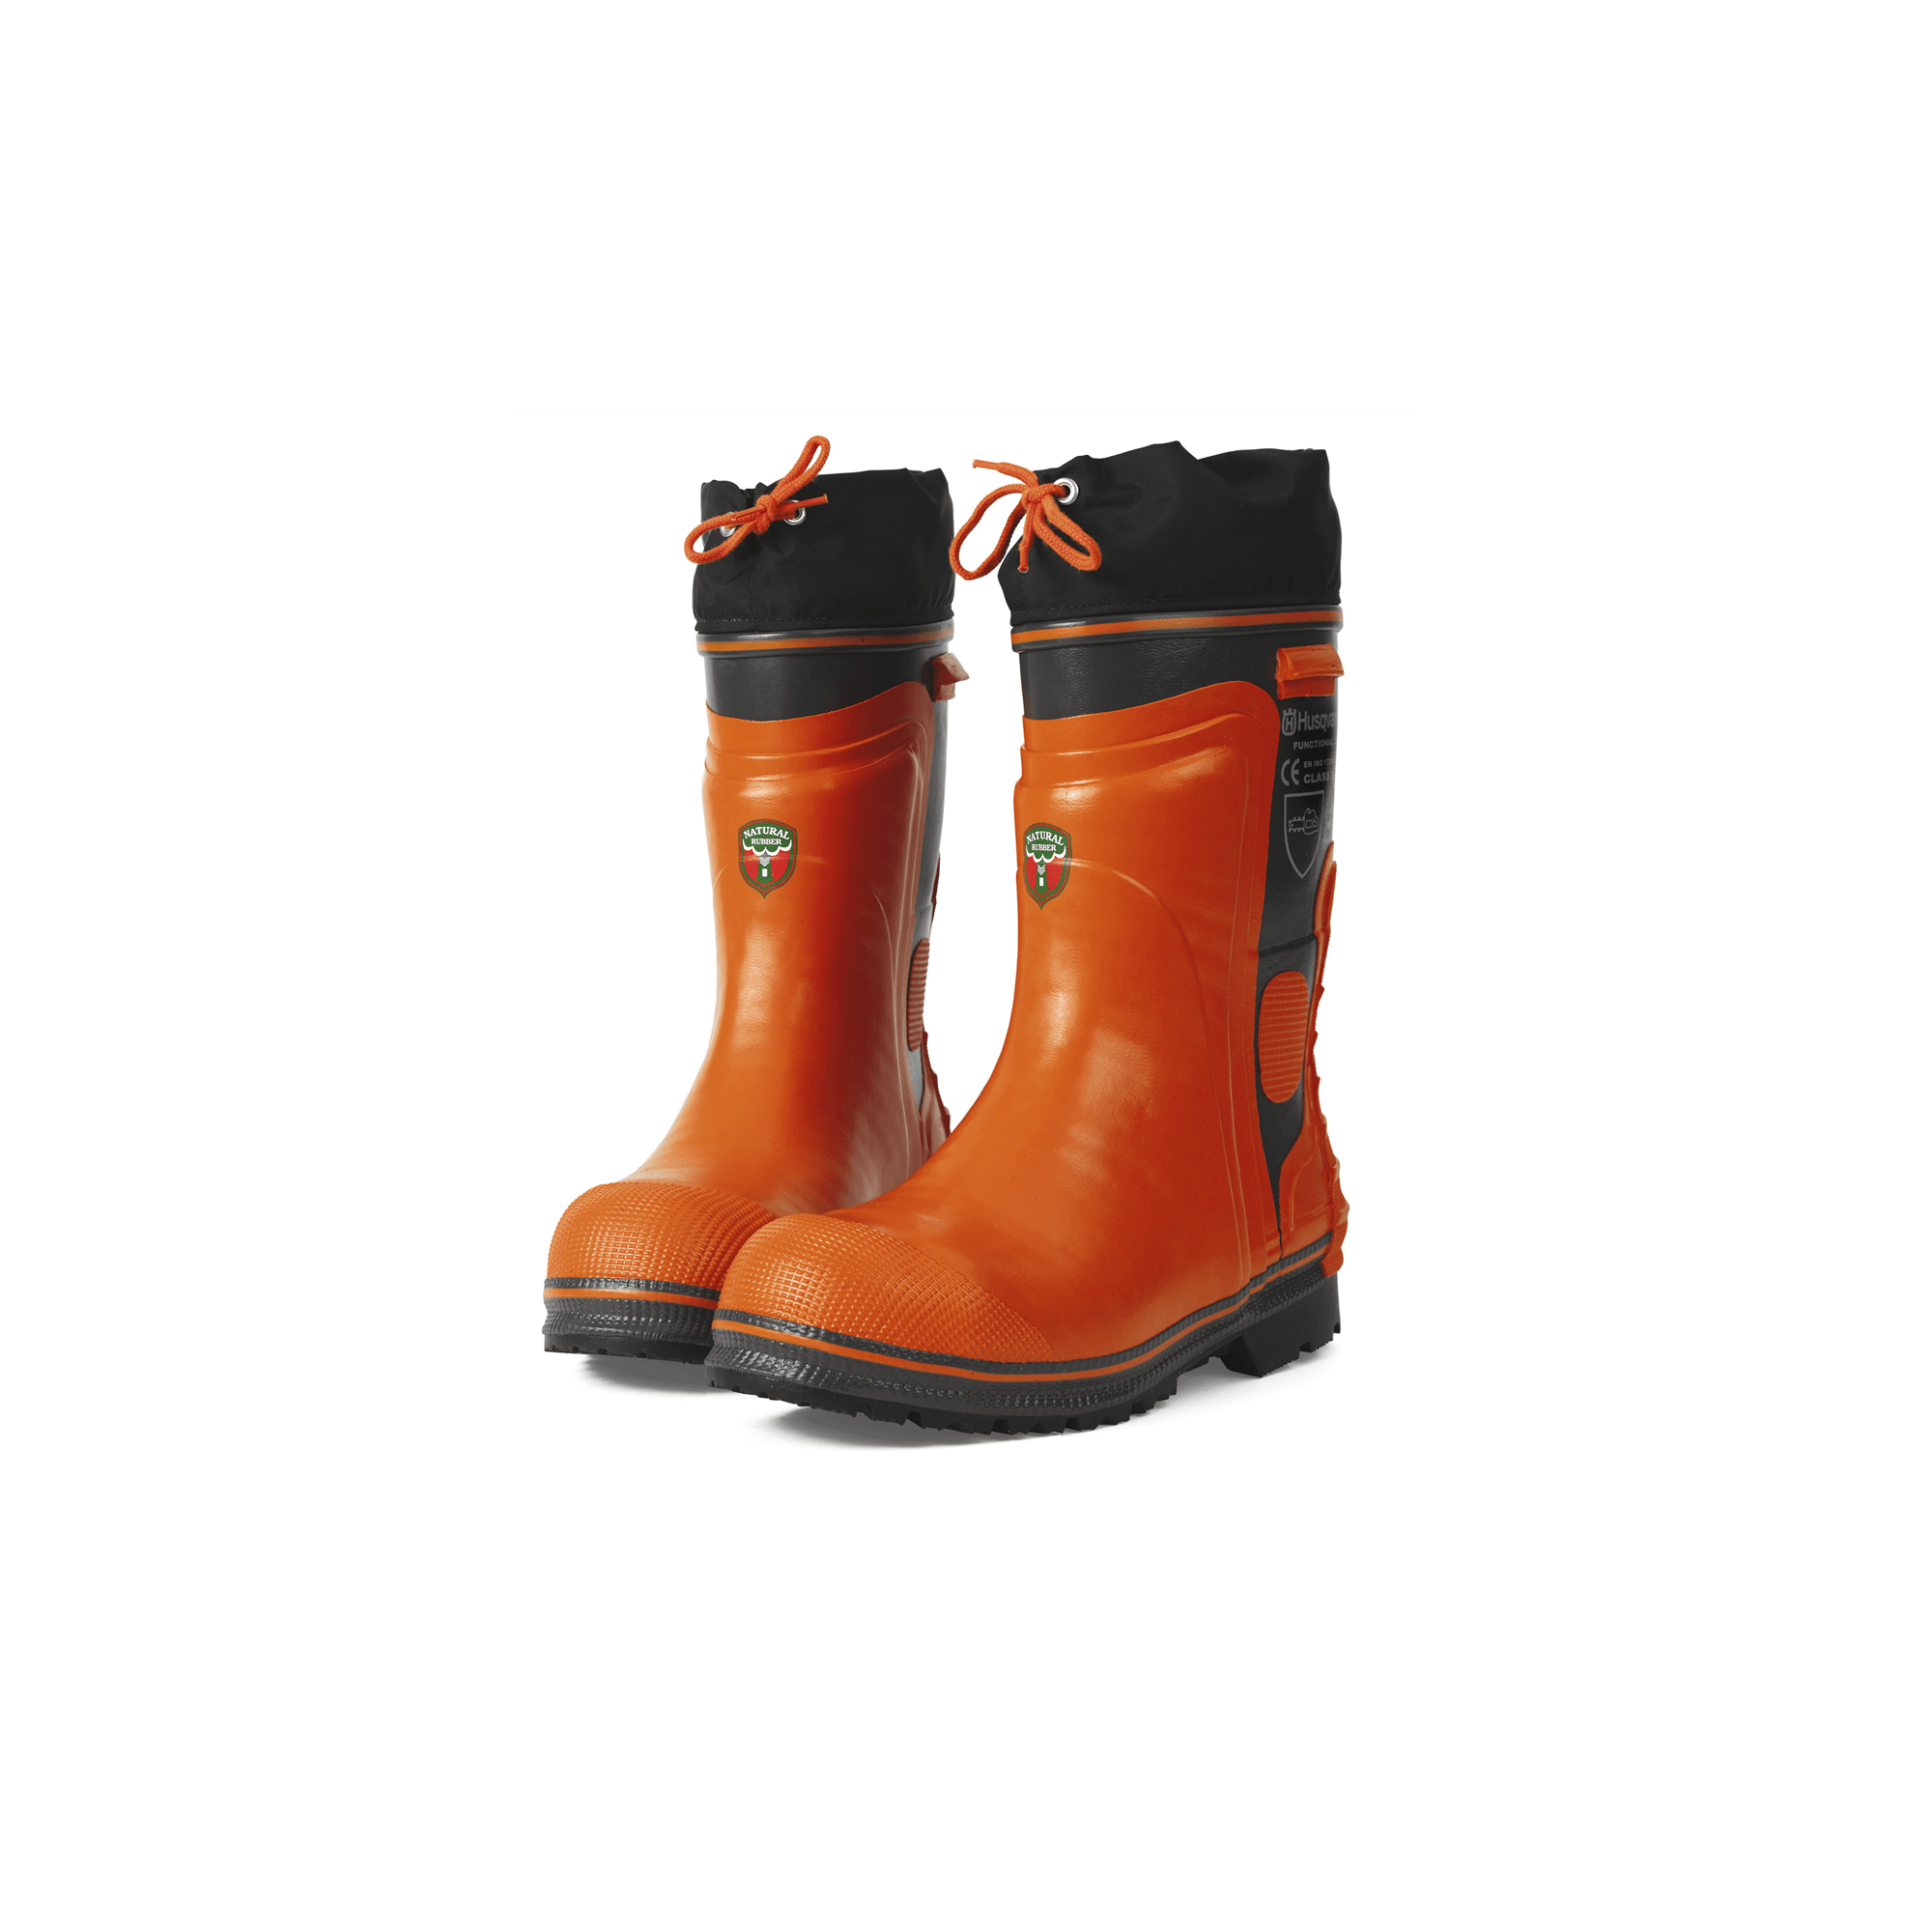 Image for Rubber Logger Boots from HusqvarnaB2C